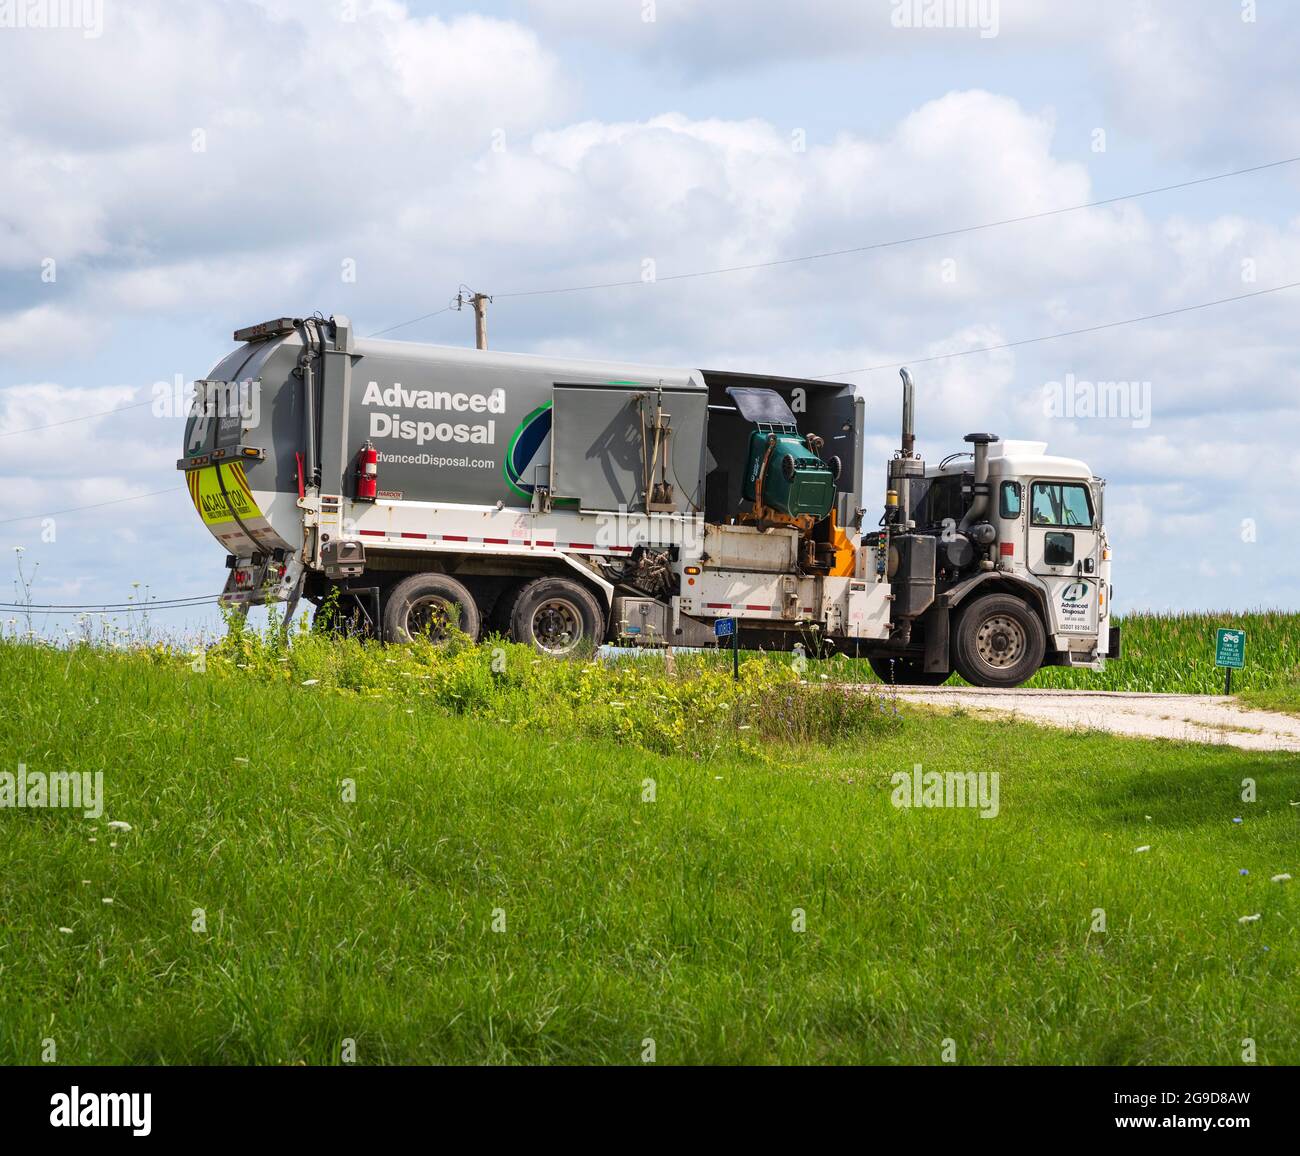 Advanced Disposal garbage truck or trash collection lorry  with automatic loader emptying refuse disposal container. Stock Photo